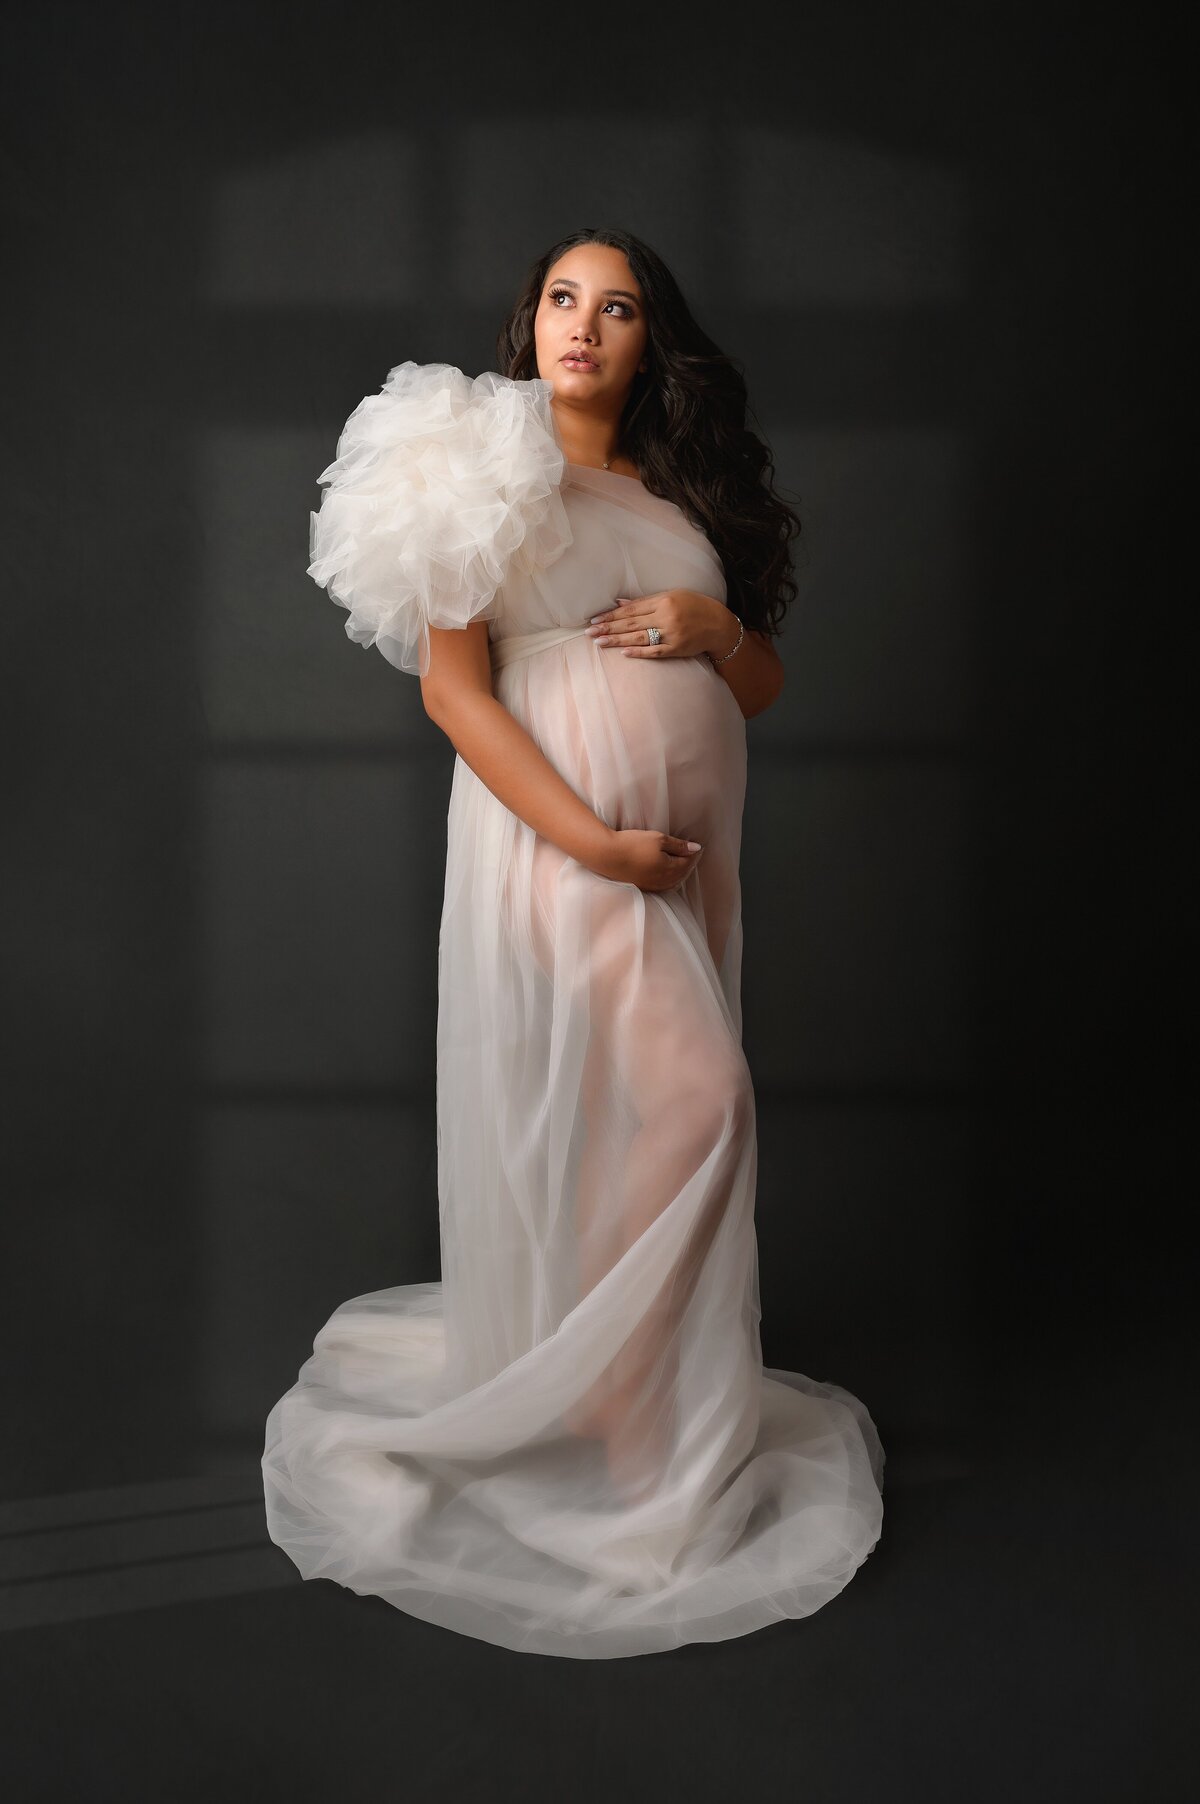 Brunette model poses for pregnant photoshoot in cream colored tulle maternity gown with shadows in the background.